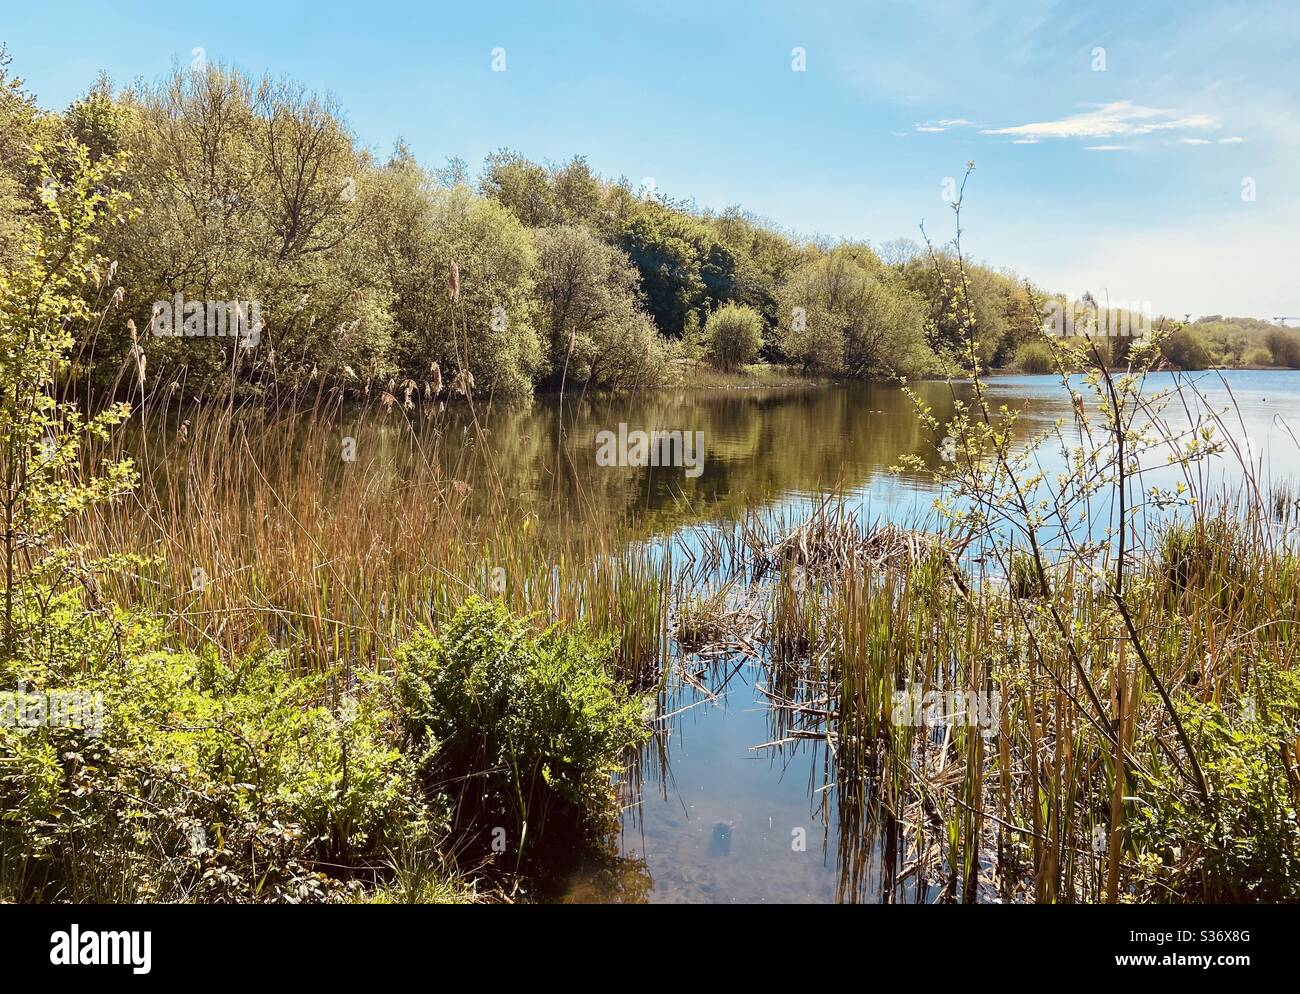 A lake on a summer’s days Stock Photo